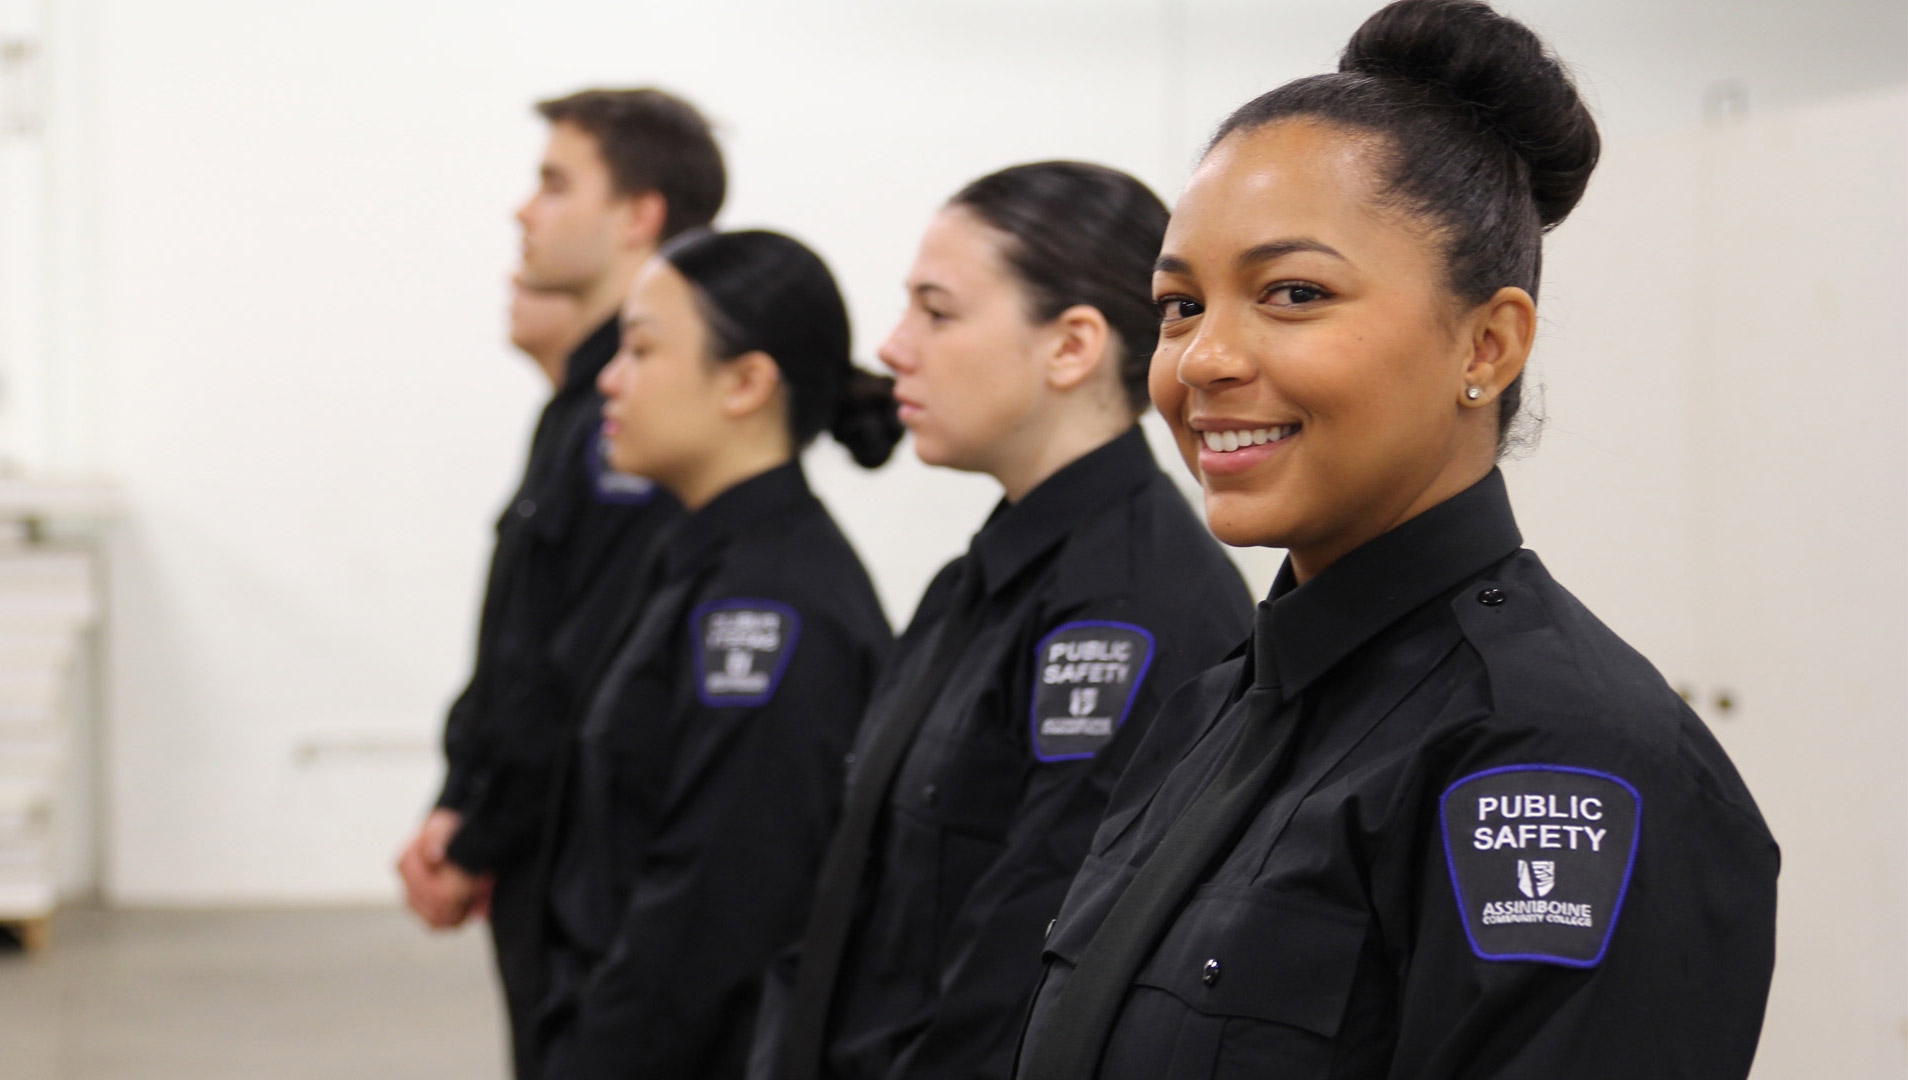 A lineup of Public Safety students in black uniforms, with the closest one smiling at the camera.